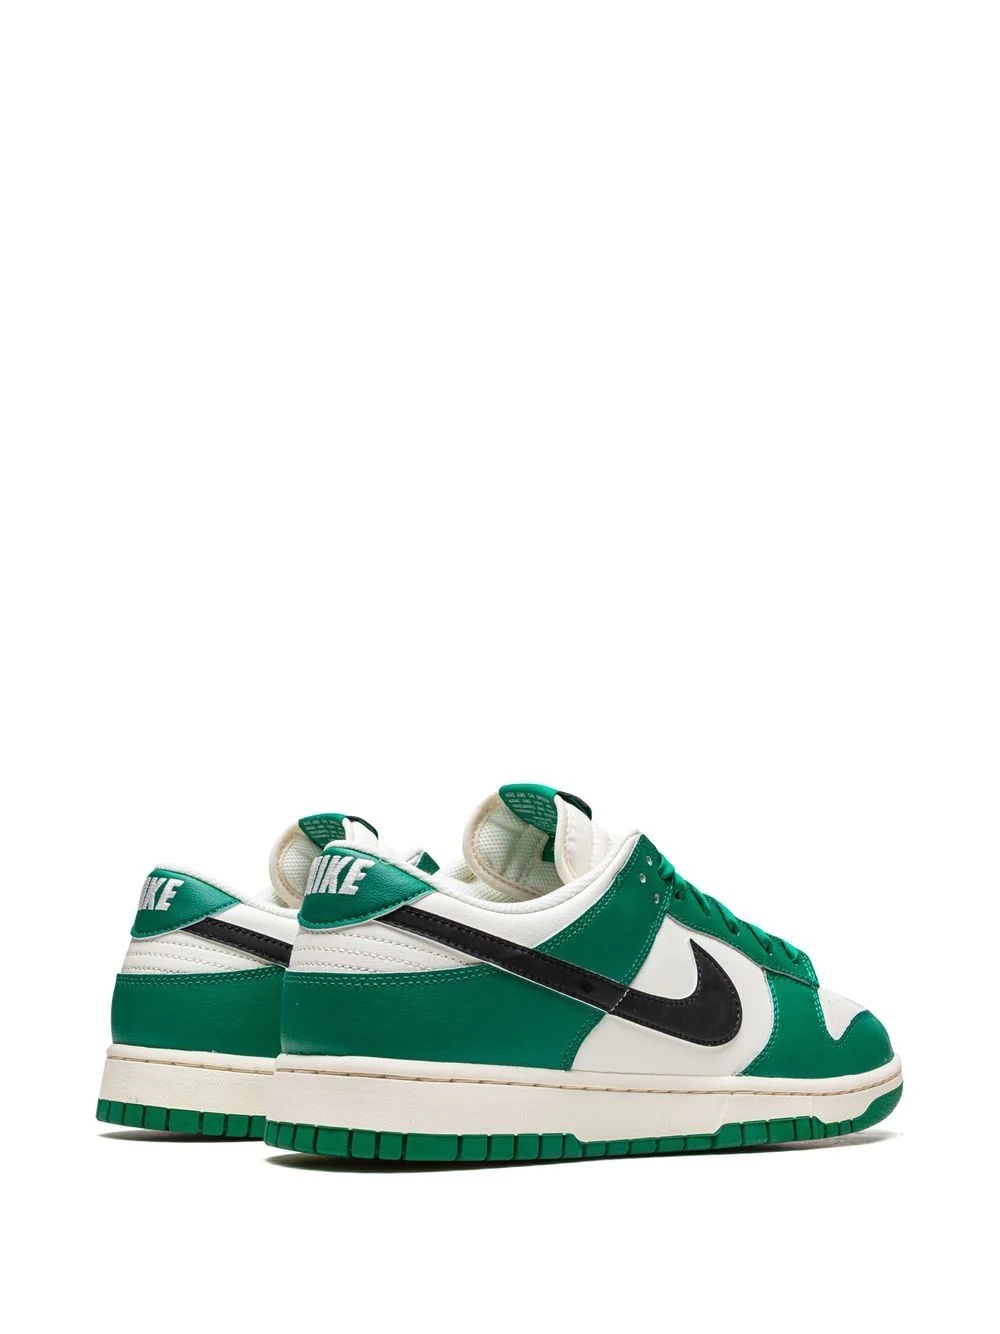 Dunk Low Retro SE "Lottery Pack - Green" sneakers - 3